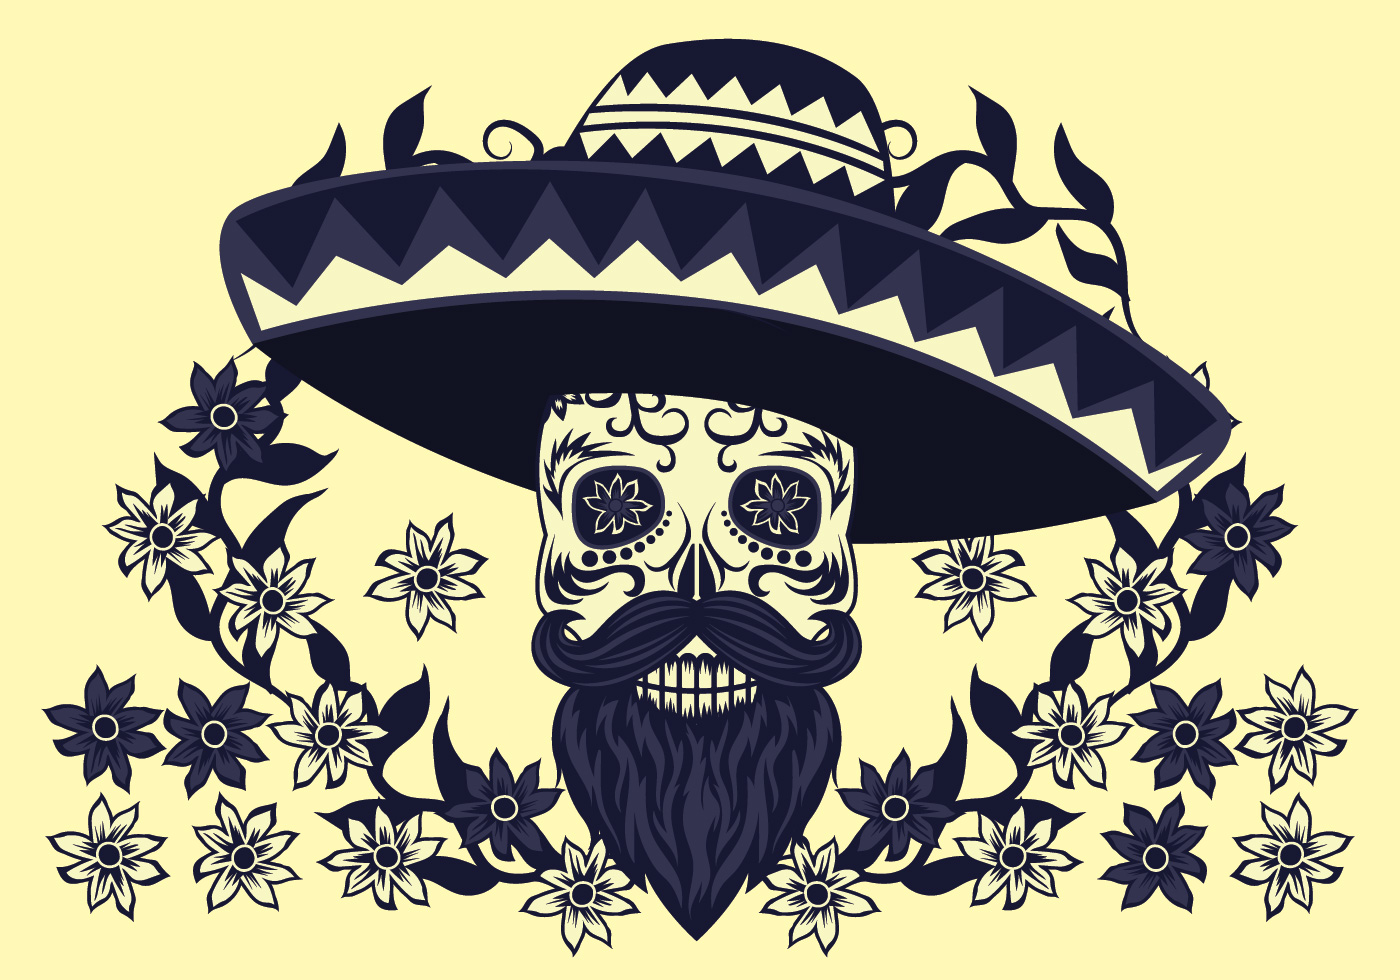 Download Day Of The Dead Illustration - Download Free Vectors ...